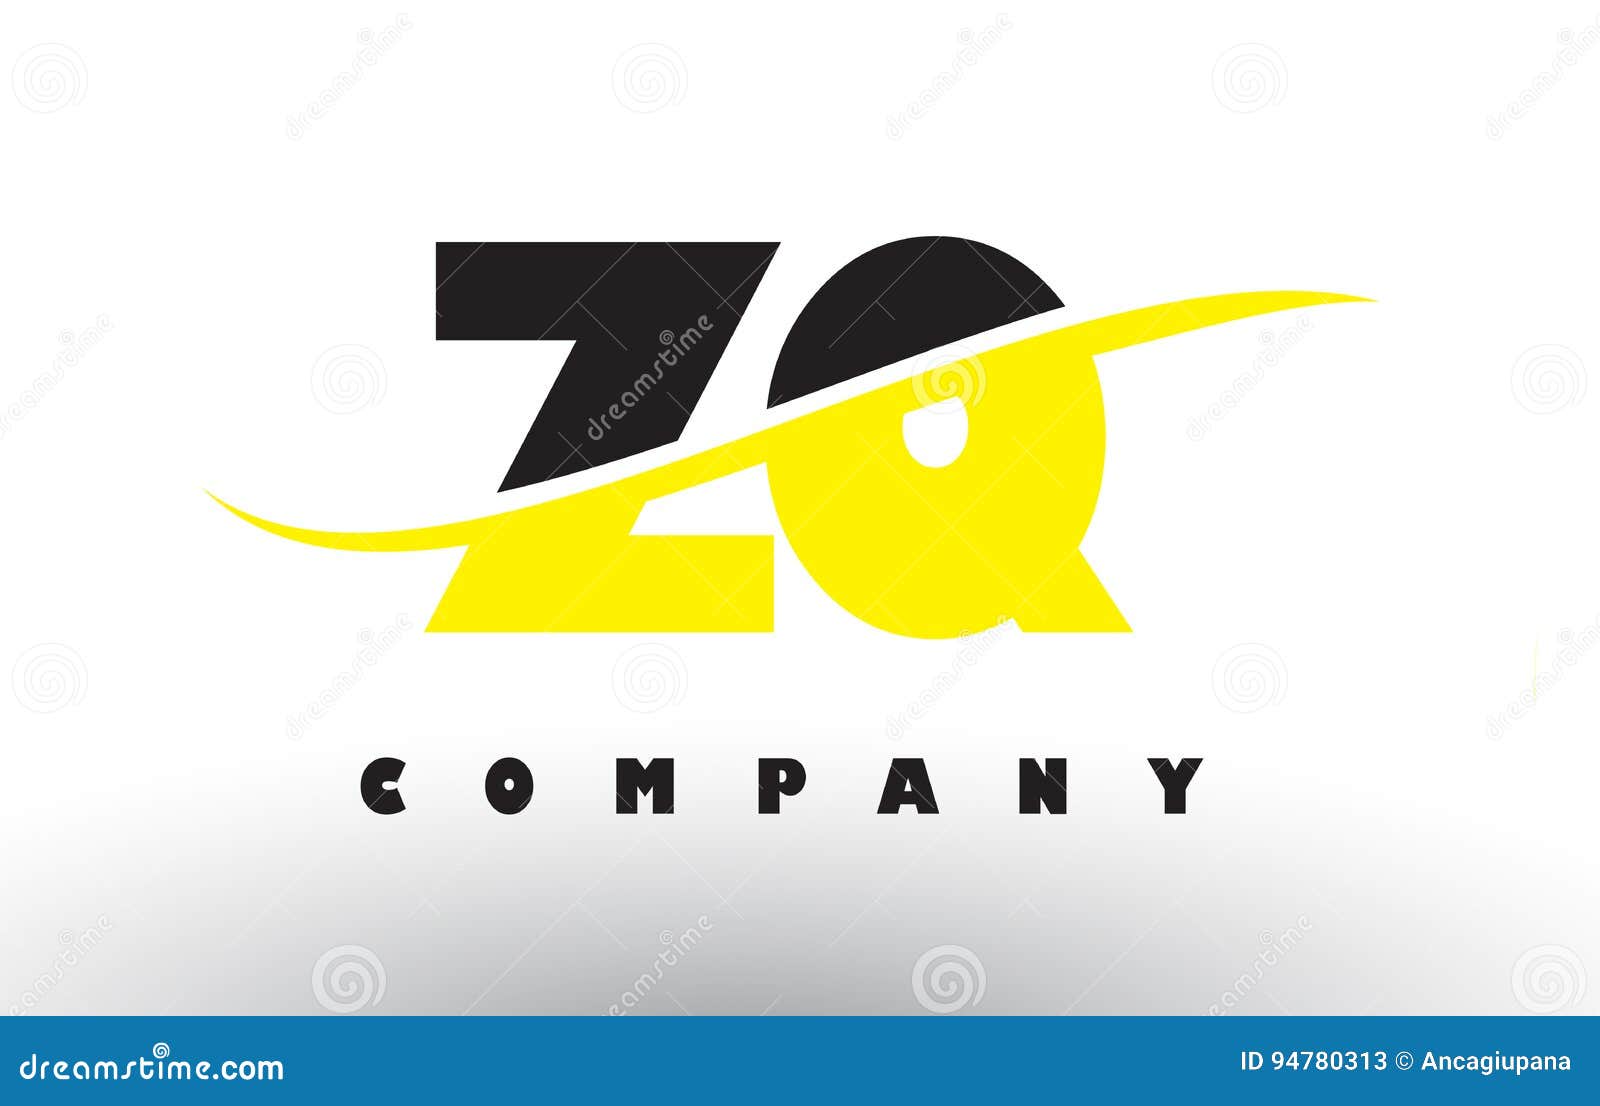 Zq Z Q Black And Yellow Letter Logo With Swoosh Stock Vector